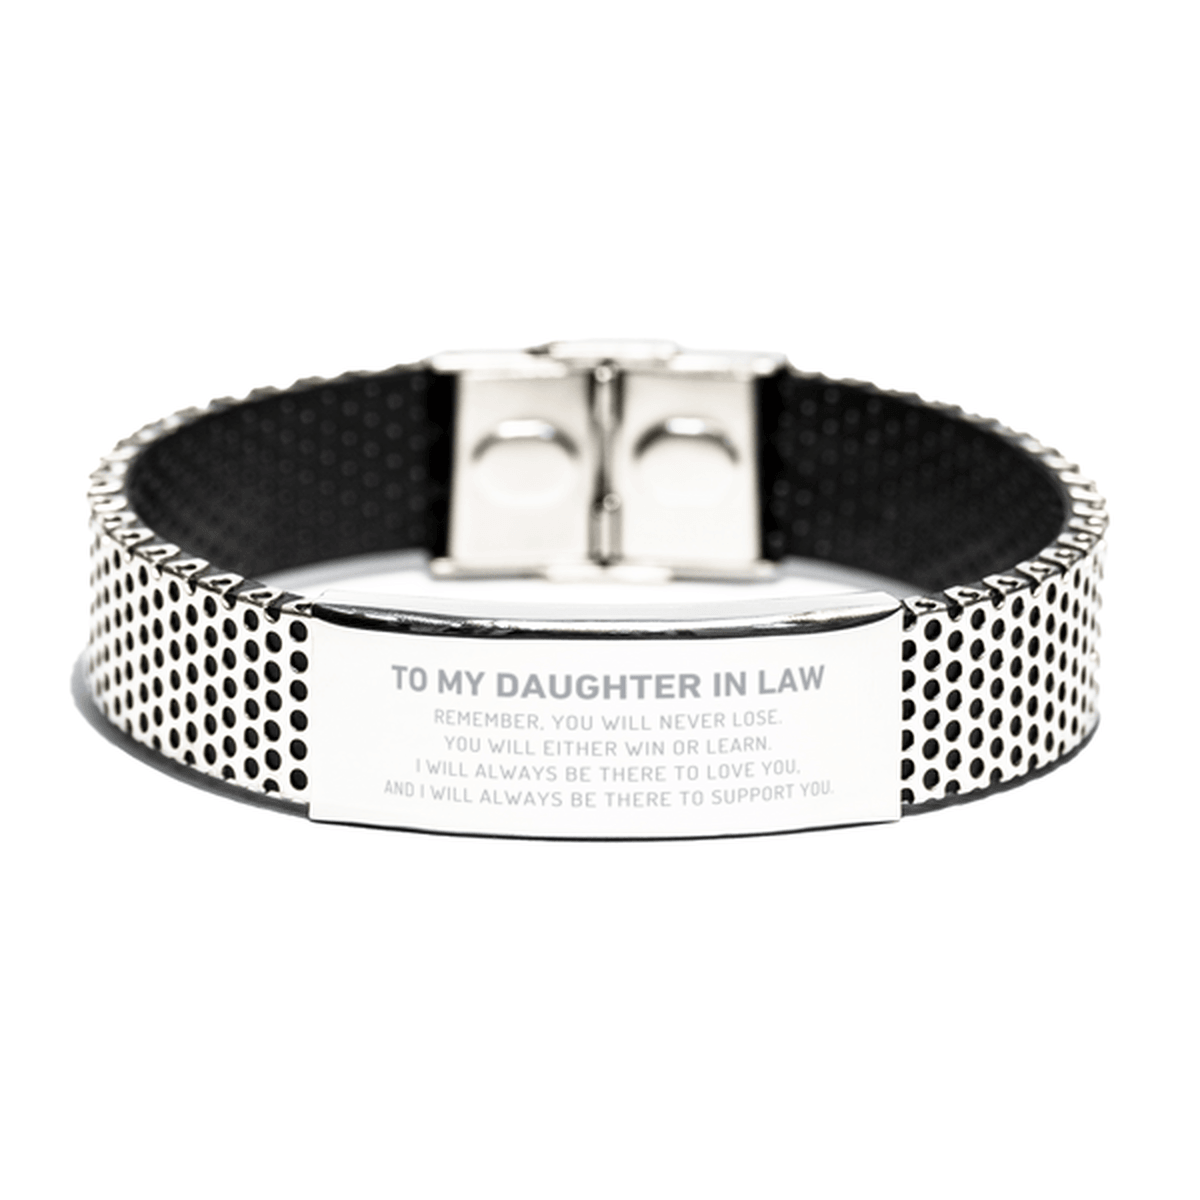 Daughter In Law Gifts, To My Daughter In Law Remember, you will never lose. You will either WIN or LEARN, Keepsake Stainless Steel Bracelet For Daughter In Law Engraved, Birthday Christmas Gifts Ideas For Daughter In Law X-mas Gifts